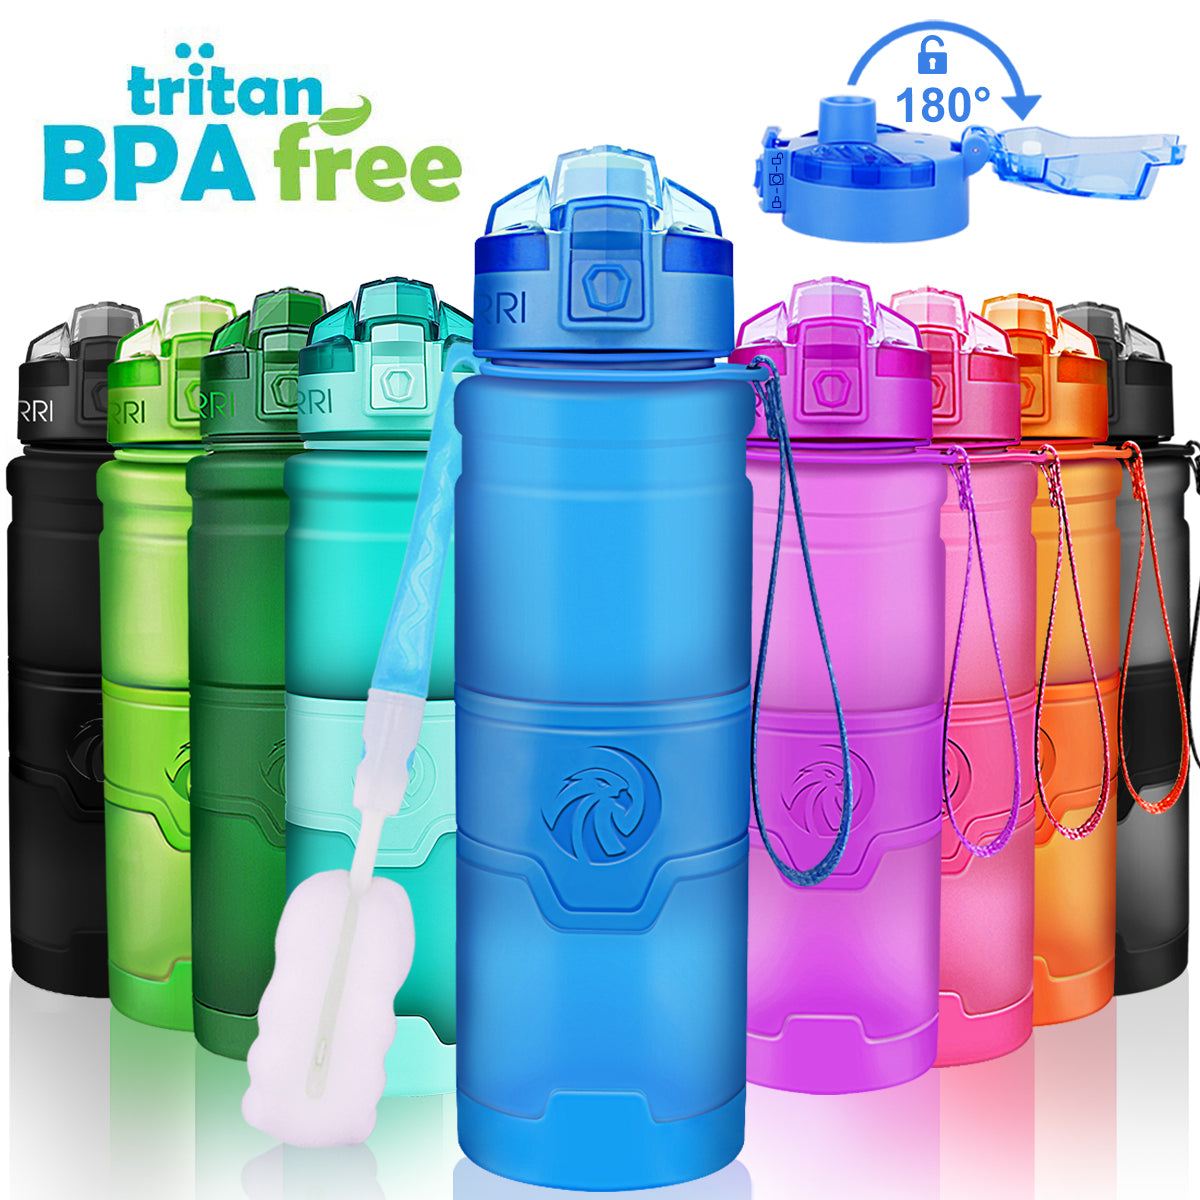 Kids Water Bottle with Straw for Toddlers with Carrying Bag, BPA-Free, Leak-Proof, 24-Ounce, Size: 24oz/700ml, Blue